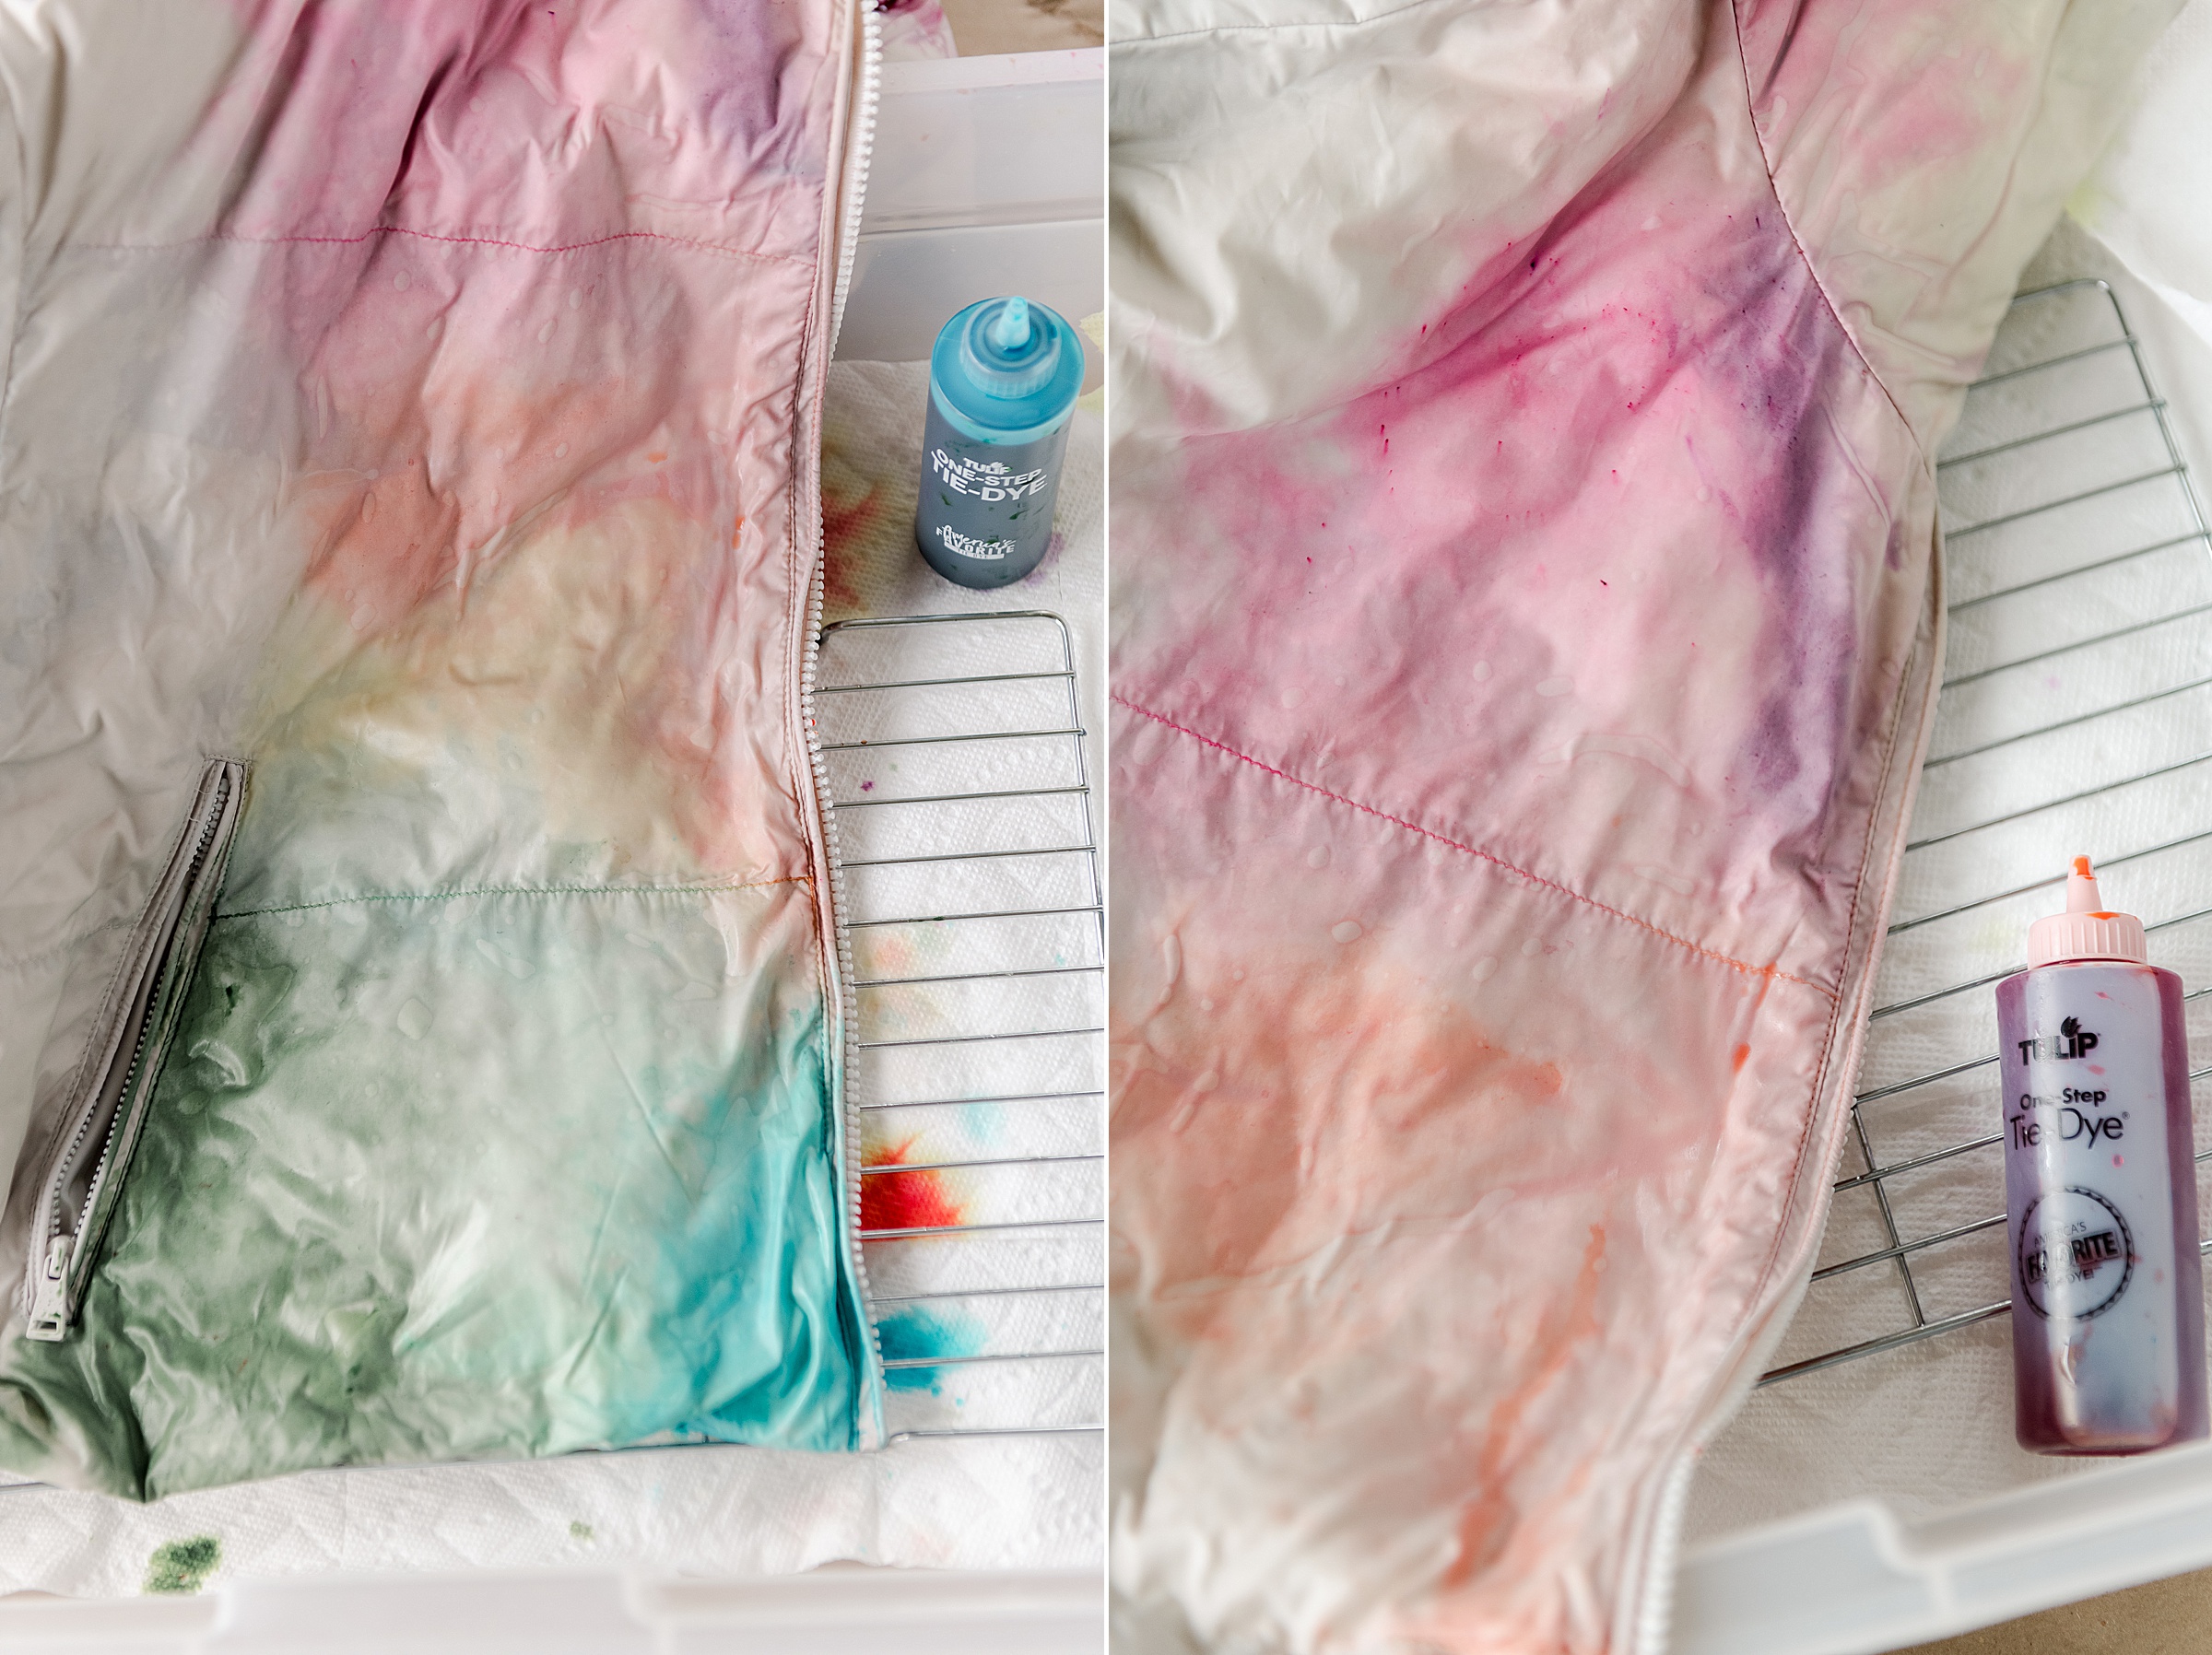 Watercolor tie dye jacket, how to do the watercolor tie dye effect, tie dye winter jacket, watercolor tie dye winter coat DIY, winter coat tie dye DIY